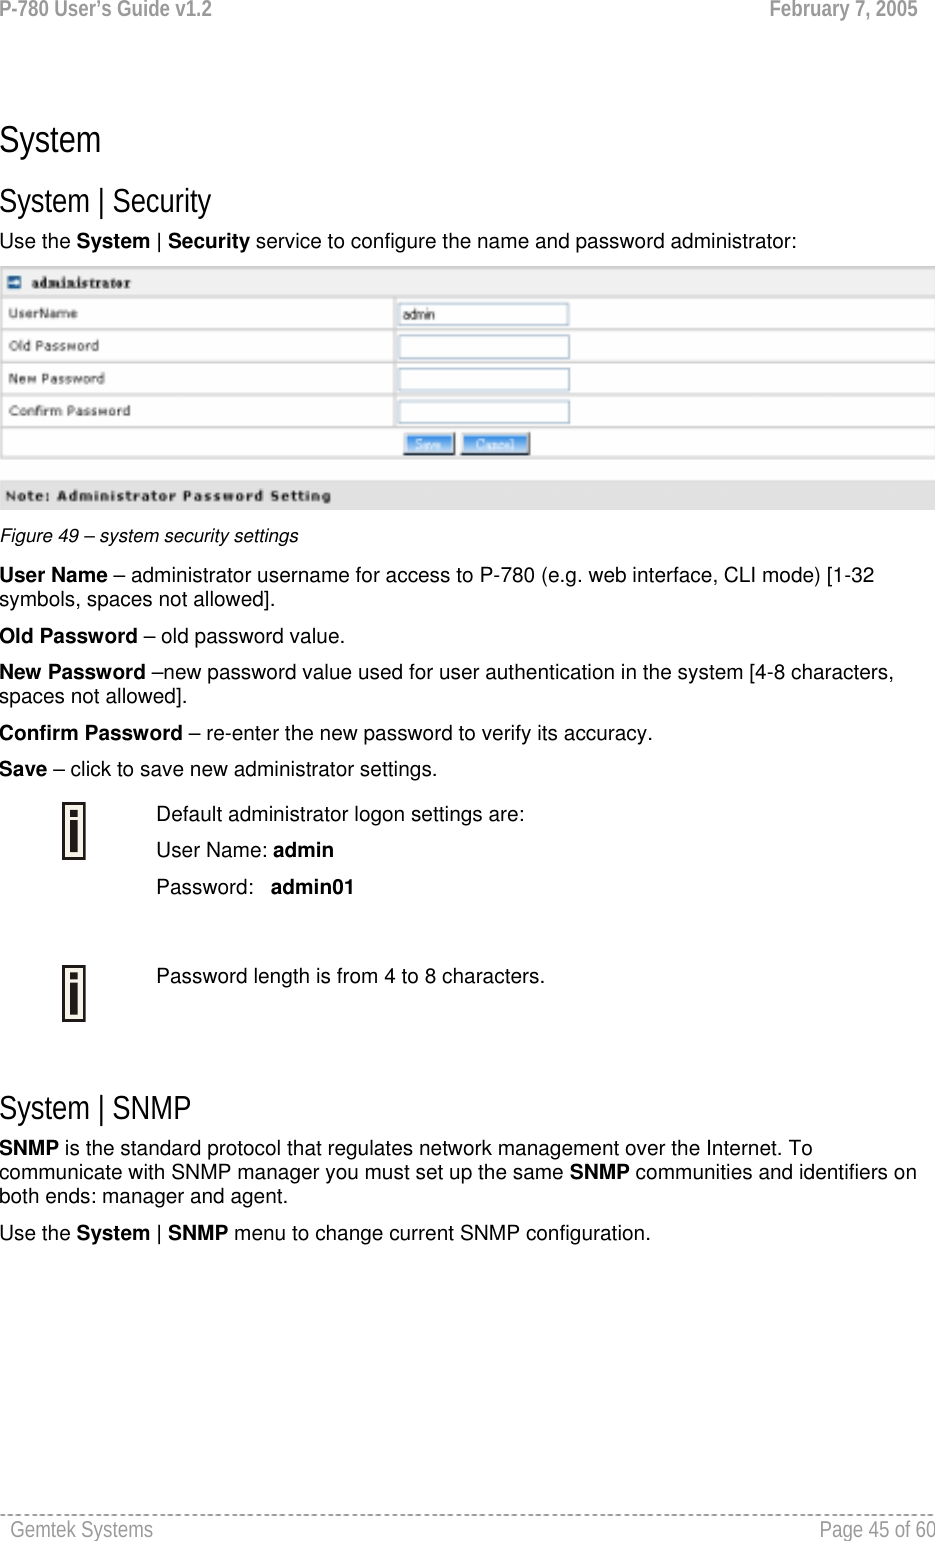 P-780 User’s Guide v1.2  February 7, 2005 Gemtek Systems    Page 45 of 60    System System | Security Use the System | Security service to configure the name and password administrator:  Figure 49 – system security settings User Name – administrator username for access to P-780 (e.g. web interface, CLI mode) [1-32 symbols, spaces not allowed]. Old Password – old password value.   New Password –new password value used for user authentication in the system [4-8 characters, spaces not allowed]. Confirm Password – re-enter the new password to verify its accuracy. Save – click to save new administrator settings.  Default administrator logon settings are: User Name: admin Password:   admin01   Password length is from 4 to 8 characters.   System | SNMP SNMP is the standard protocol that regulates network management over the Internet. To communicate with SNMP manager you must set up the same SNMP communities and identifiers on both ends: manager and agent. Use the System | SNMP menu to change current SNMP configuration. 